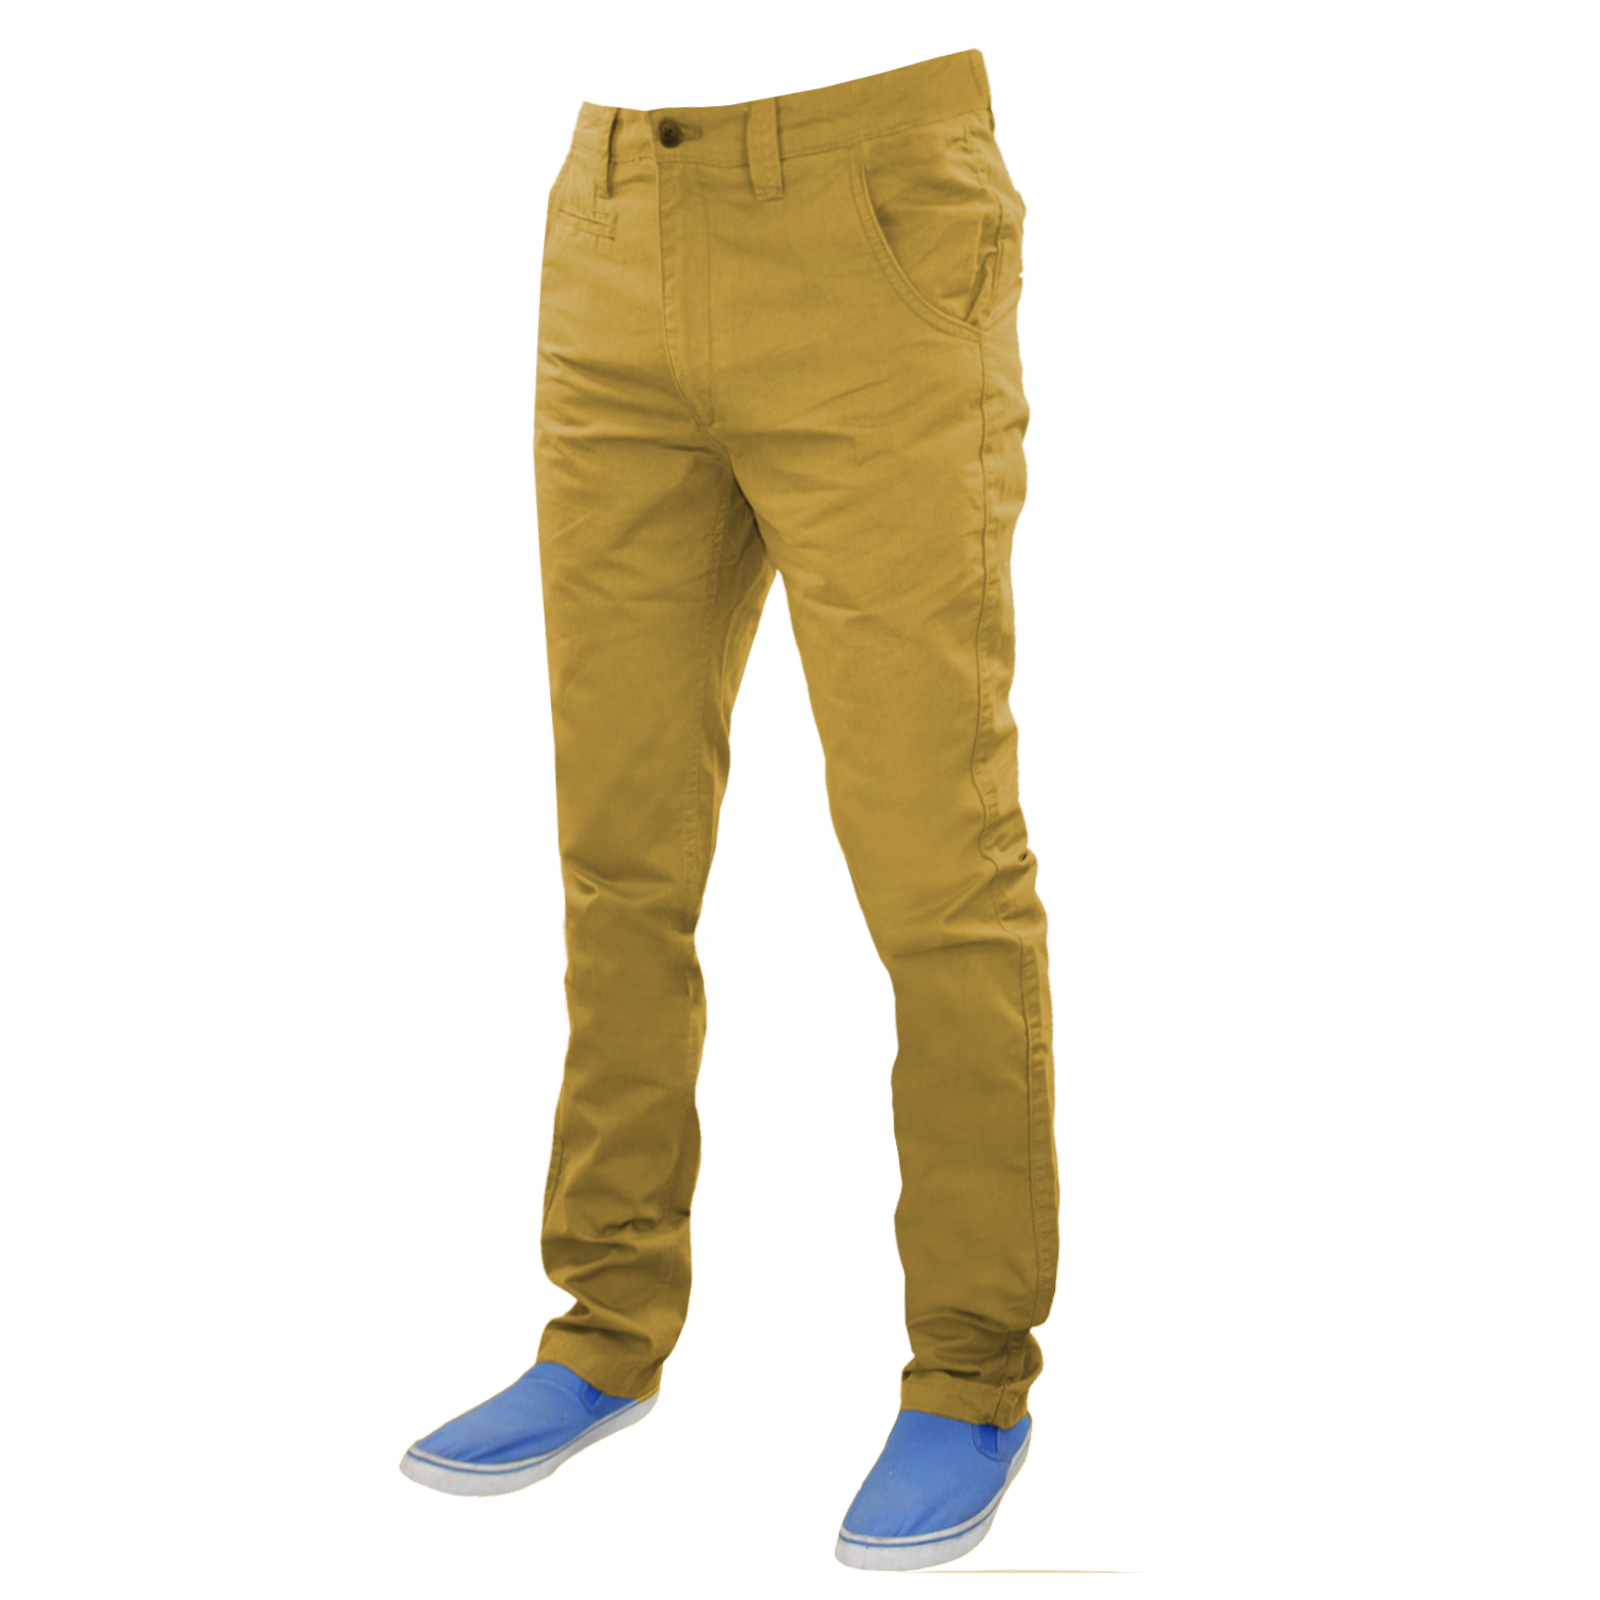 NEW MENS DESIGNER STRETCH CHINO SKINNY SLIM FIT JEANS TROUSER PANTS ALL SIZES